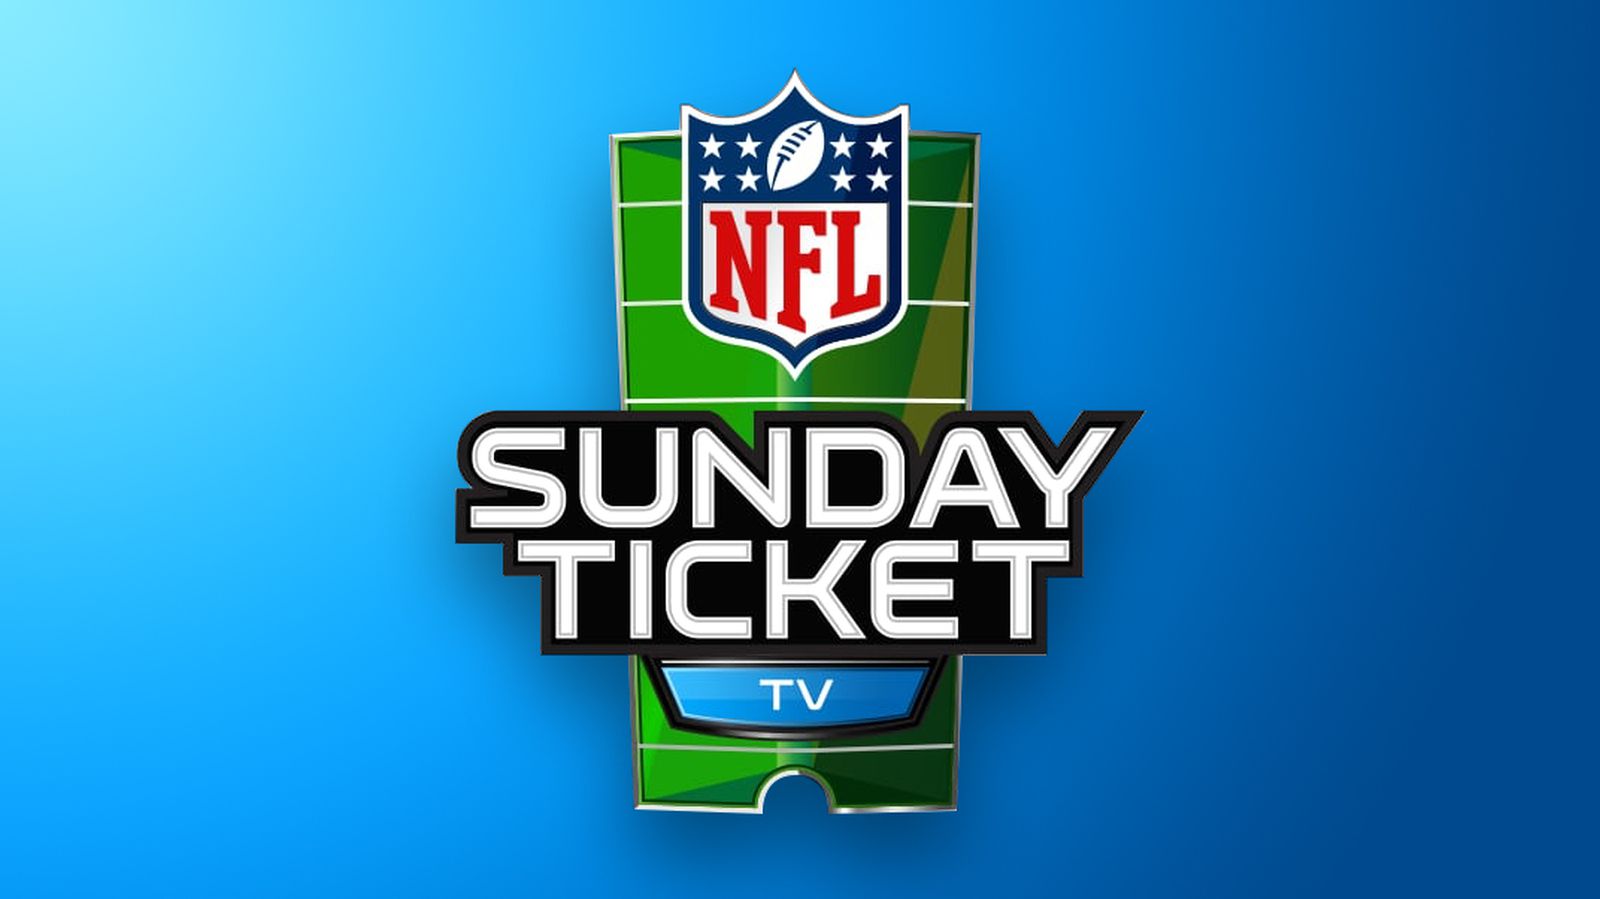 Apple Apparently Wants to Offer NFL Sunday Ticket to Apple TV+ Subscribers  at No Extra Cost, But NFL Balks - MacRumors